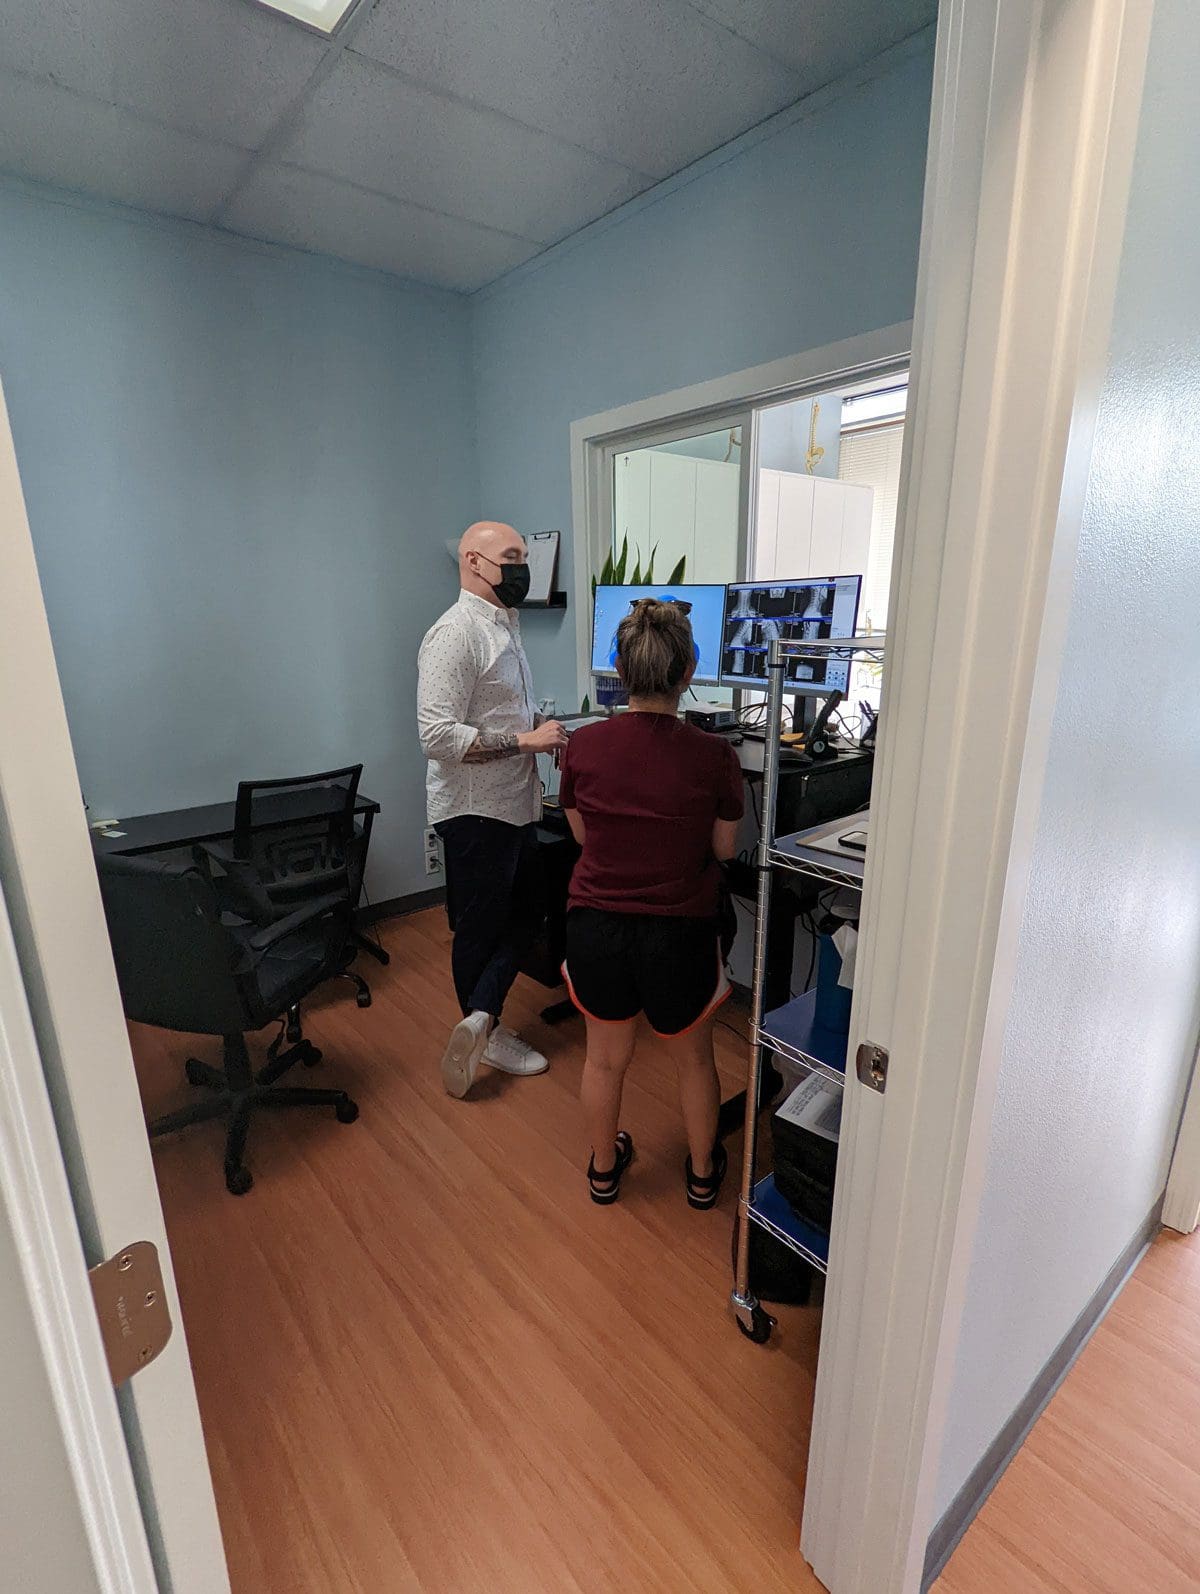 Dr. Chris Gosselin talking with a patient at the Hazel Dell chiropractic Clinic